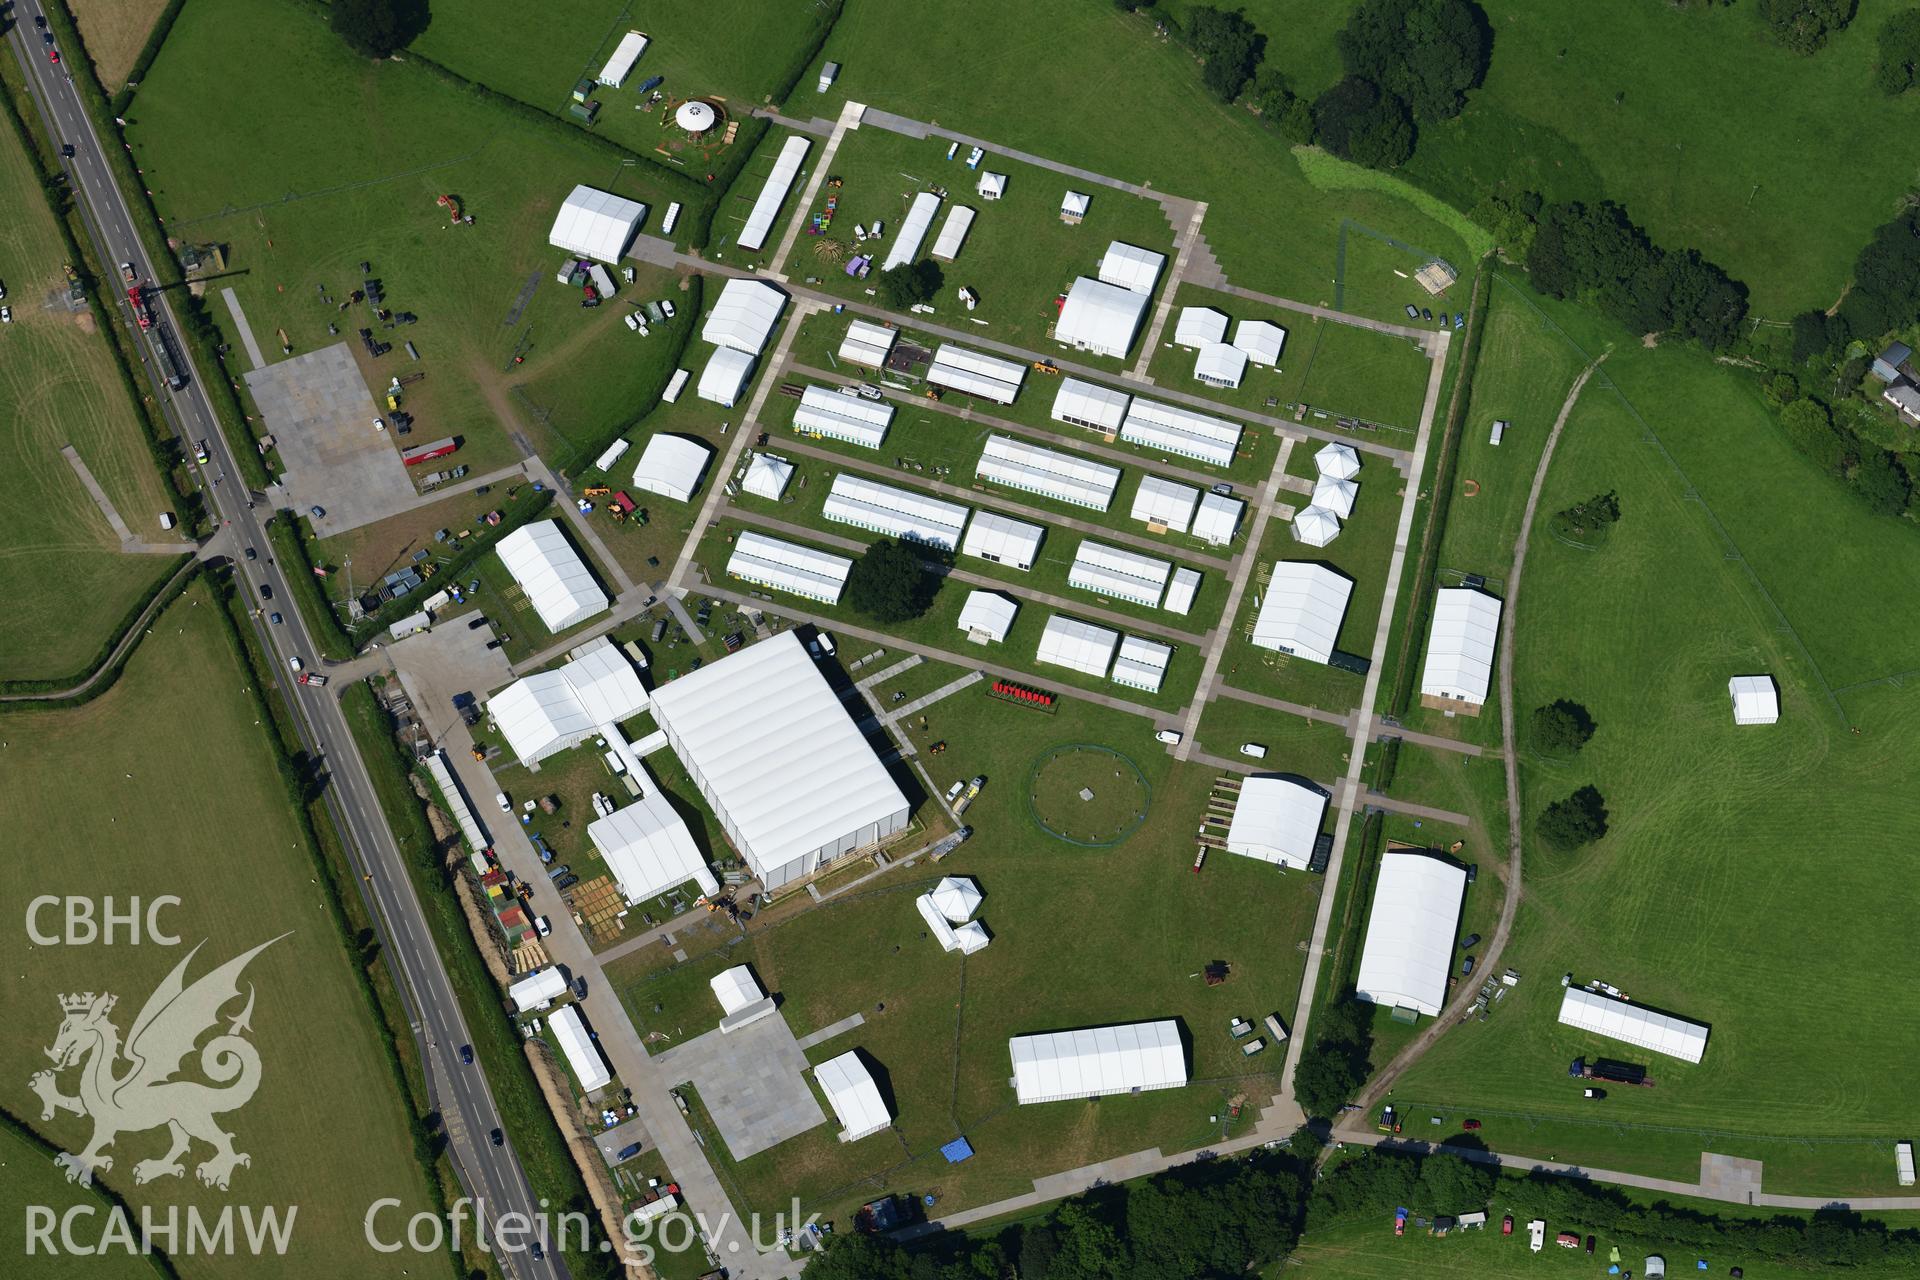 Maes yr Eisteddfod 2019, a mile to the south of Llanrwst town. Photographed during the process of setting up. Oblique aerial photograph taken during the Royal Commission?s programme of archaeological aerial reconnaissance by Toby Driver on 23rd July 2019.